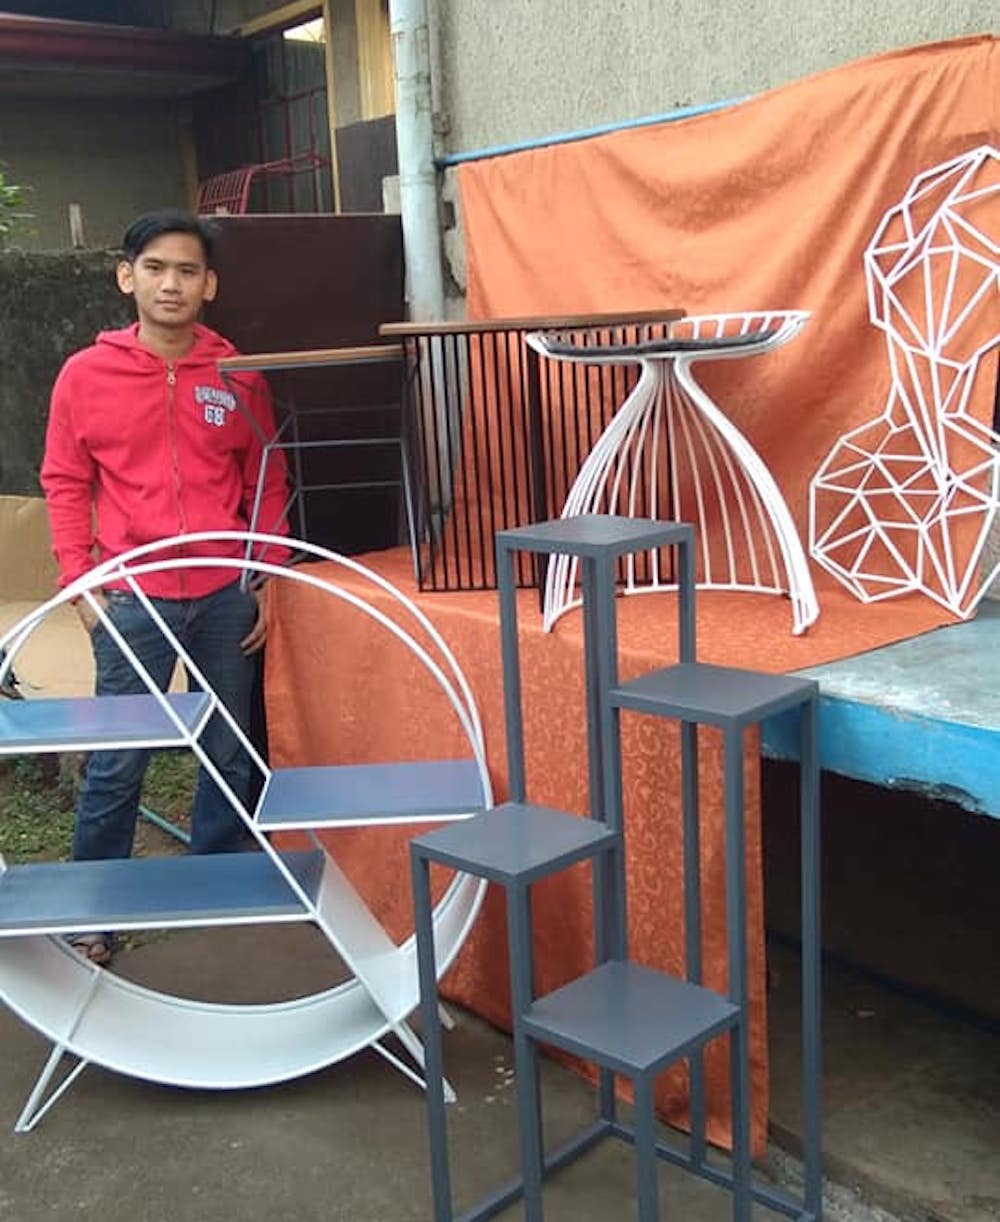 Young Filipino man stands by shelves and other furniture he made, Raymart Montinola